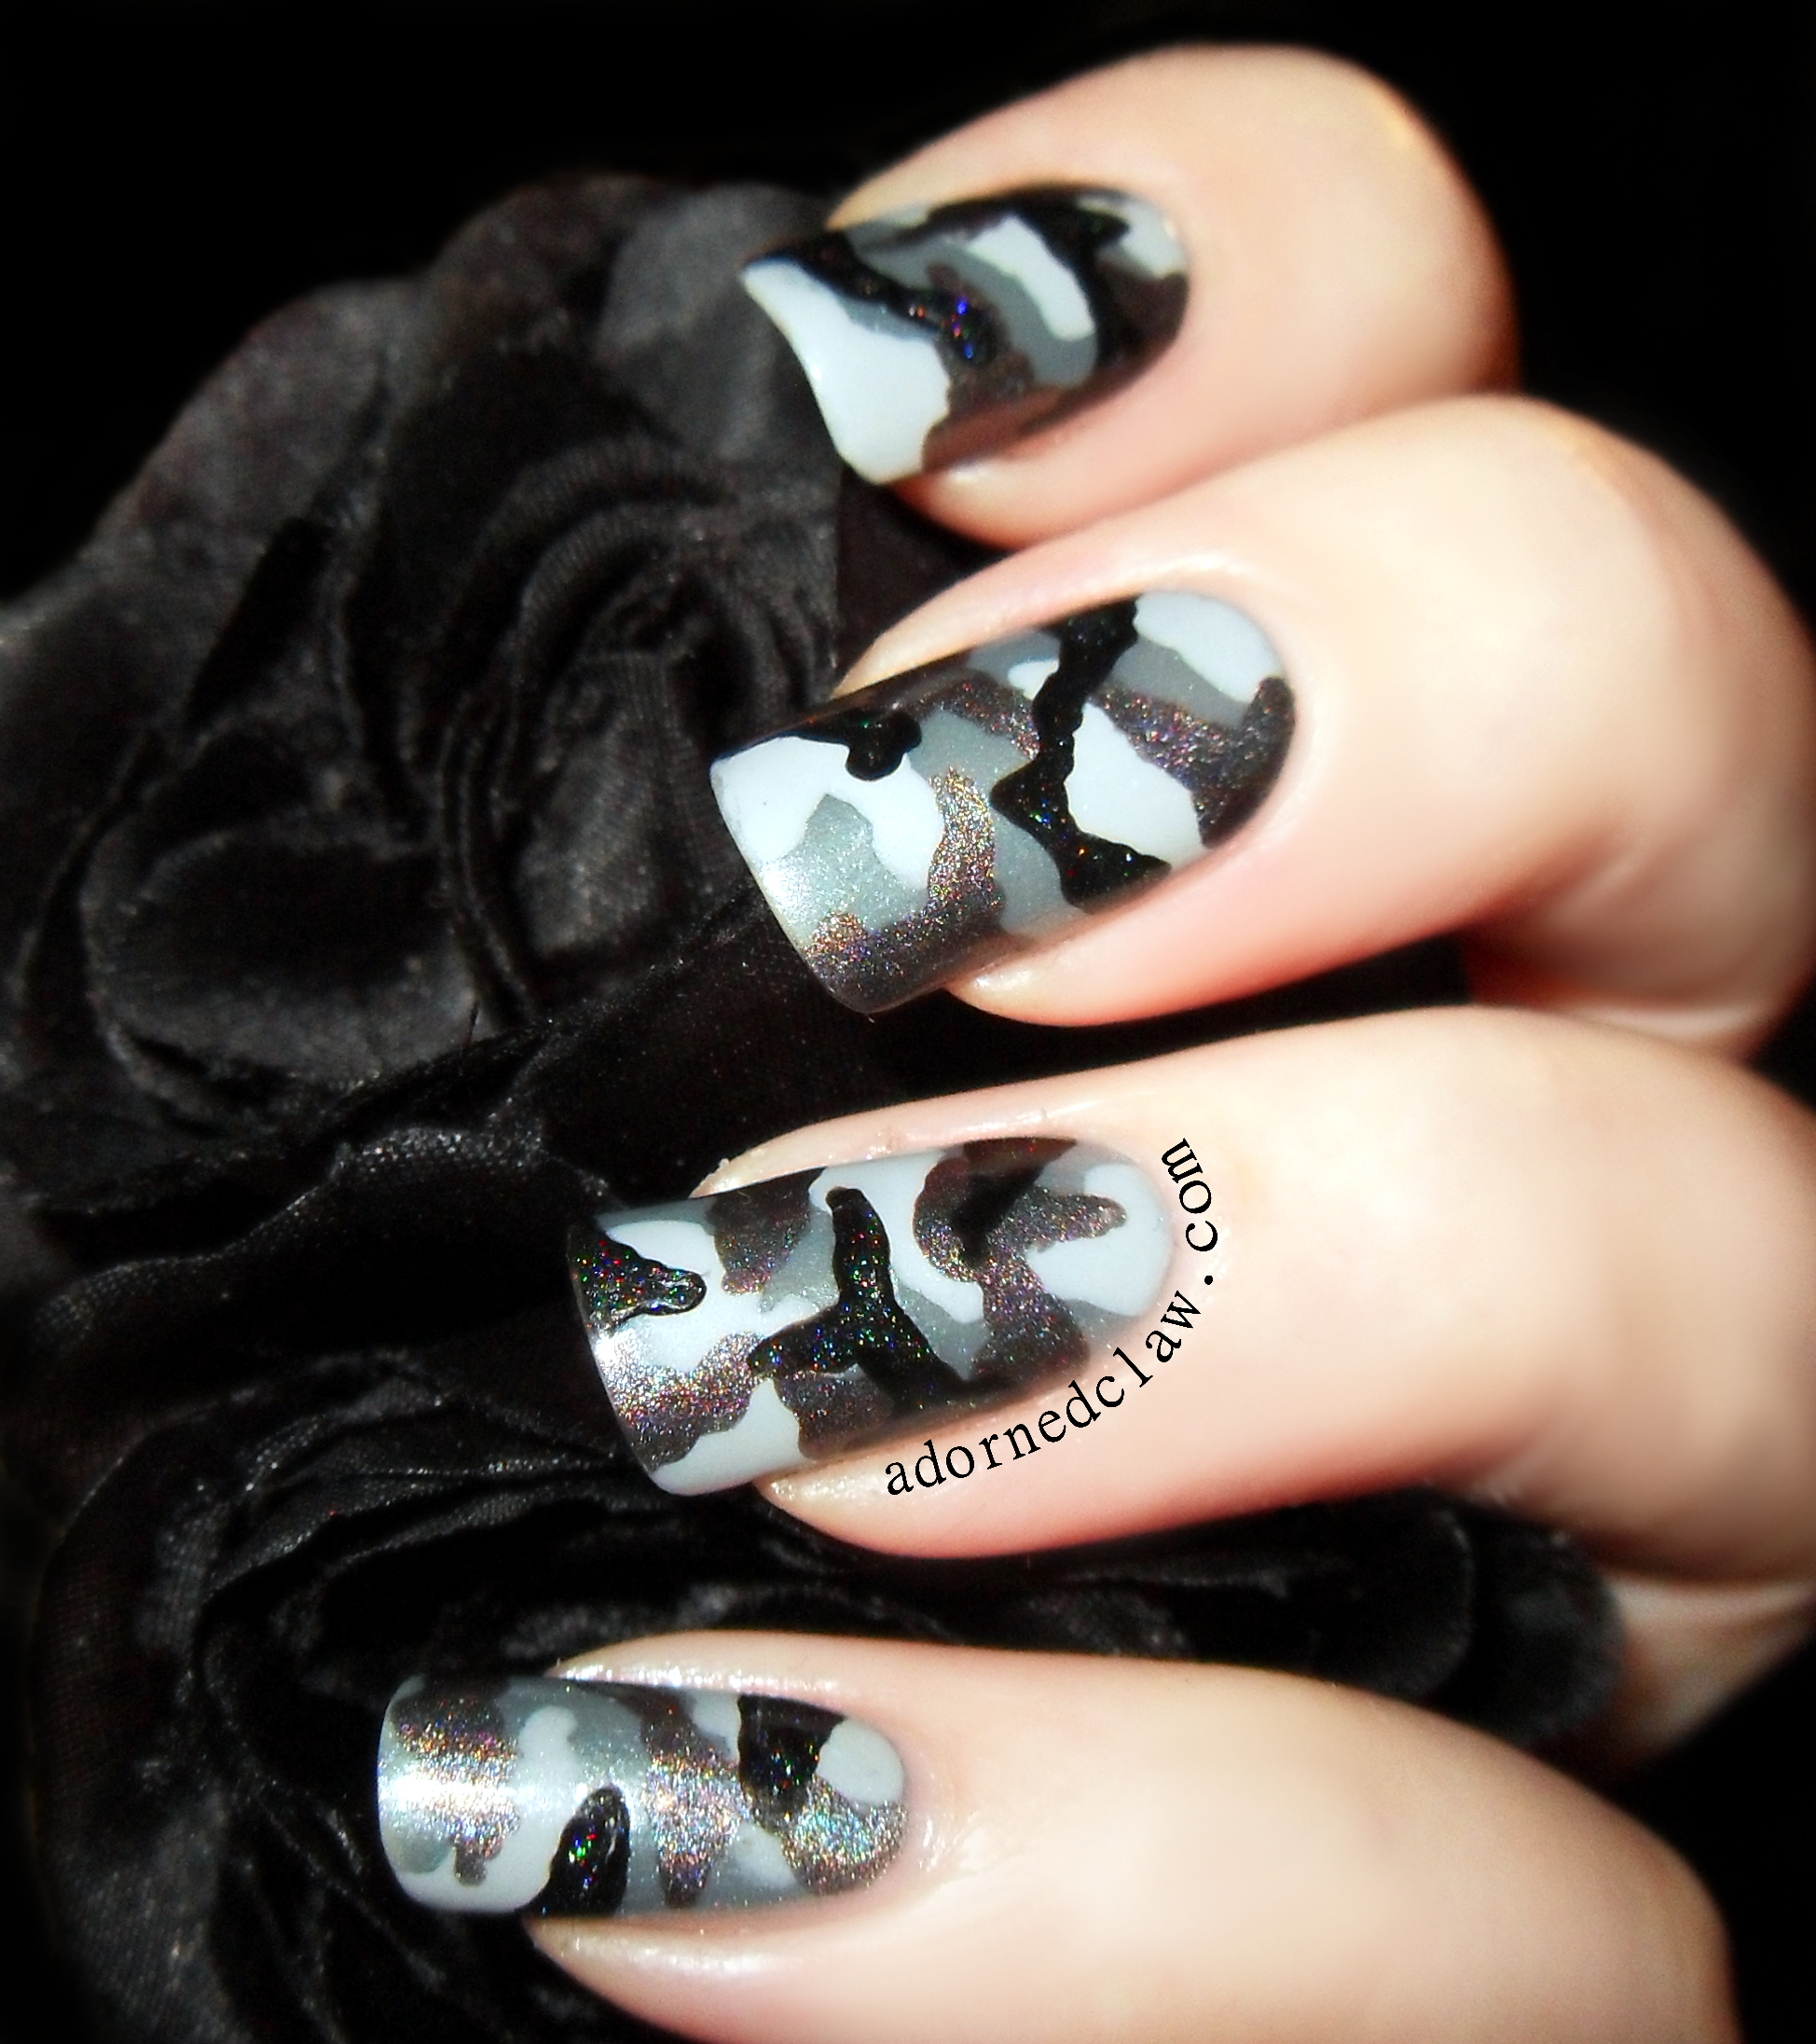 Camouflage Nails | The Adorned Claw1948 x 2192